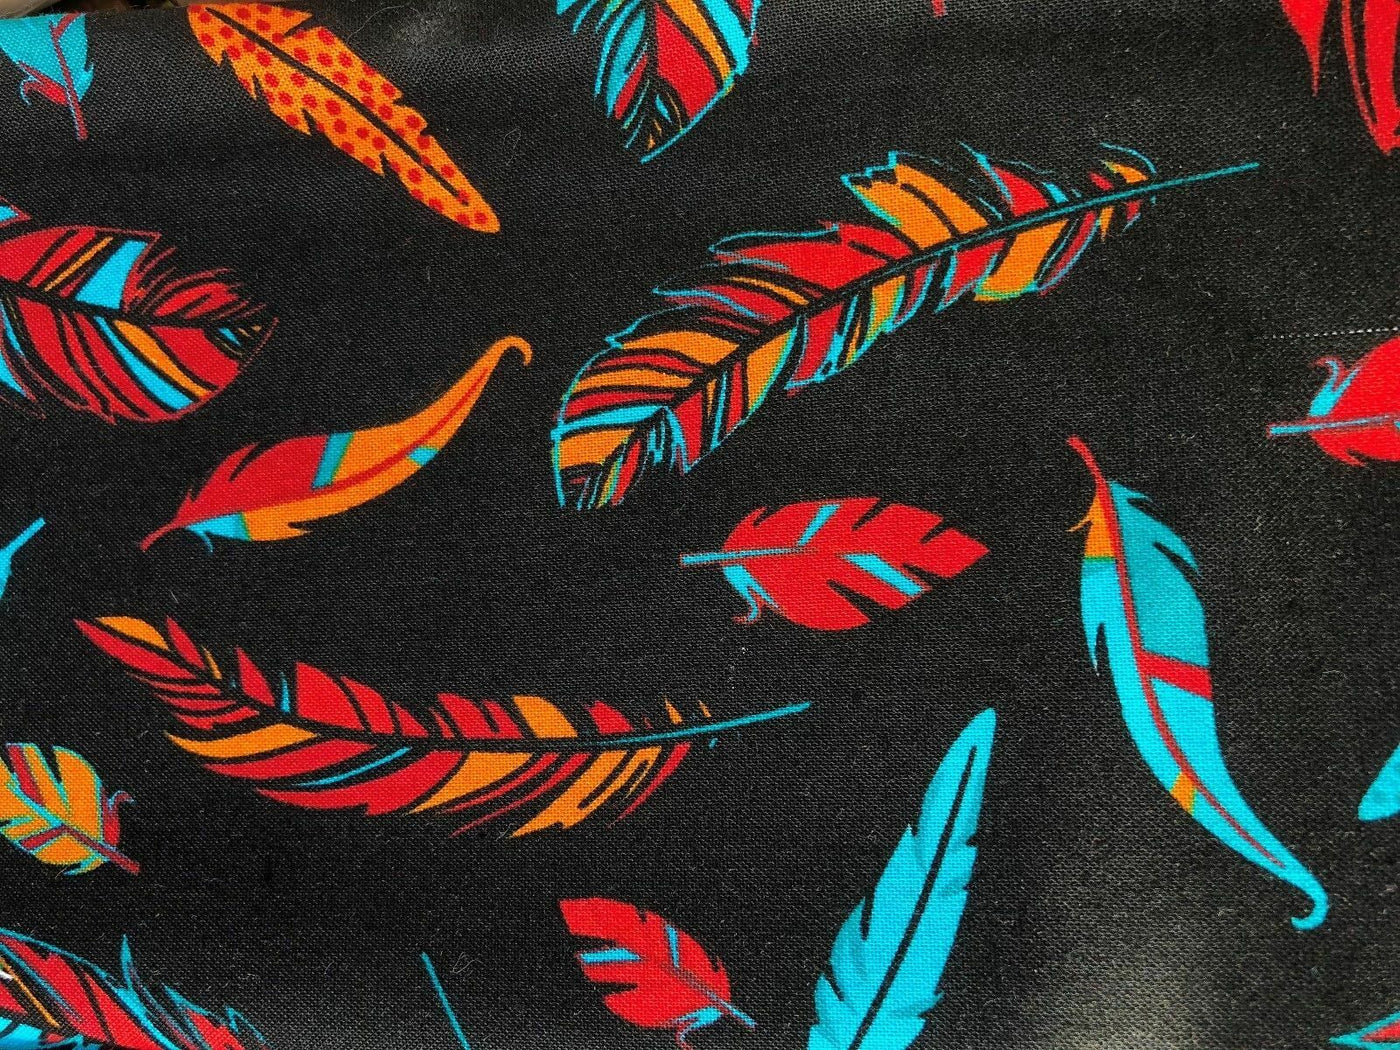 Feather - Timeless Treasures - 100% Cotton Fabric